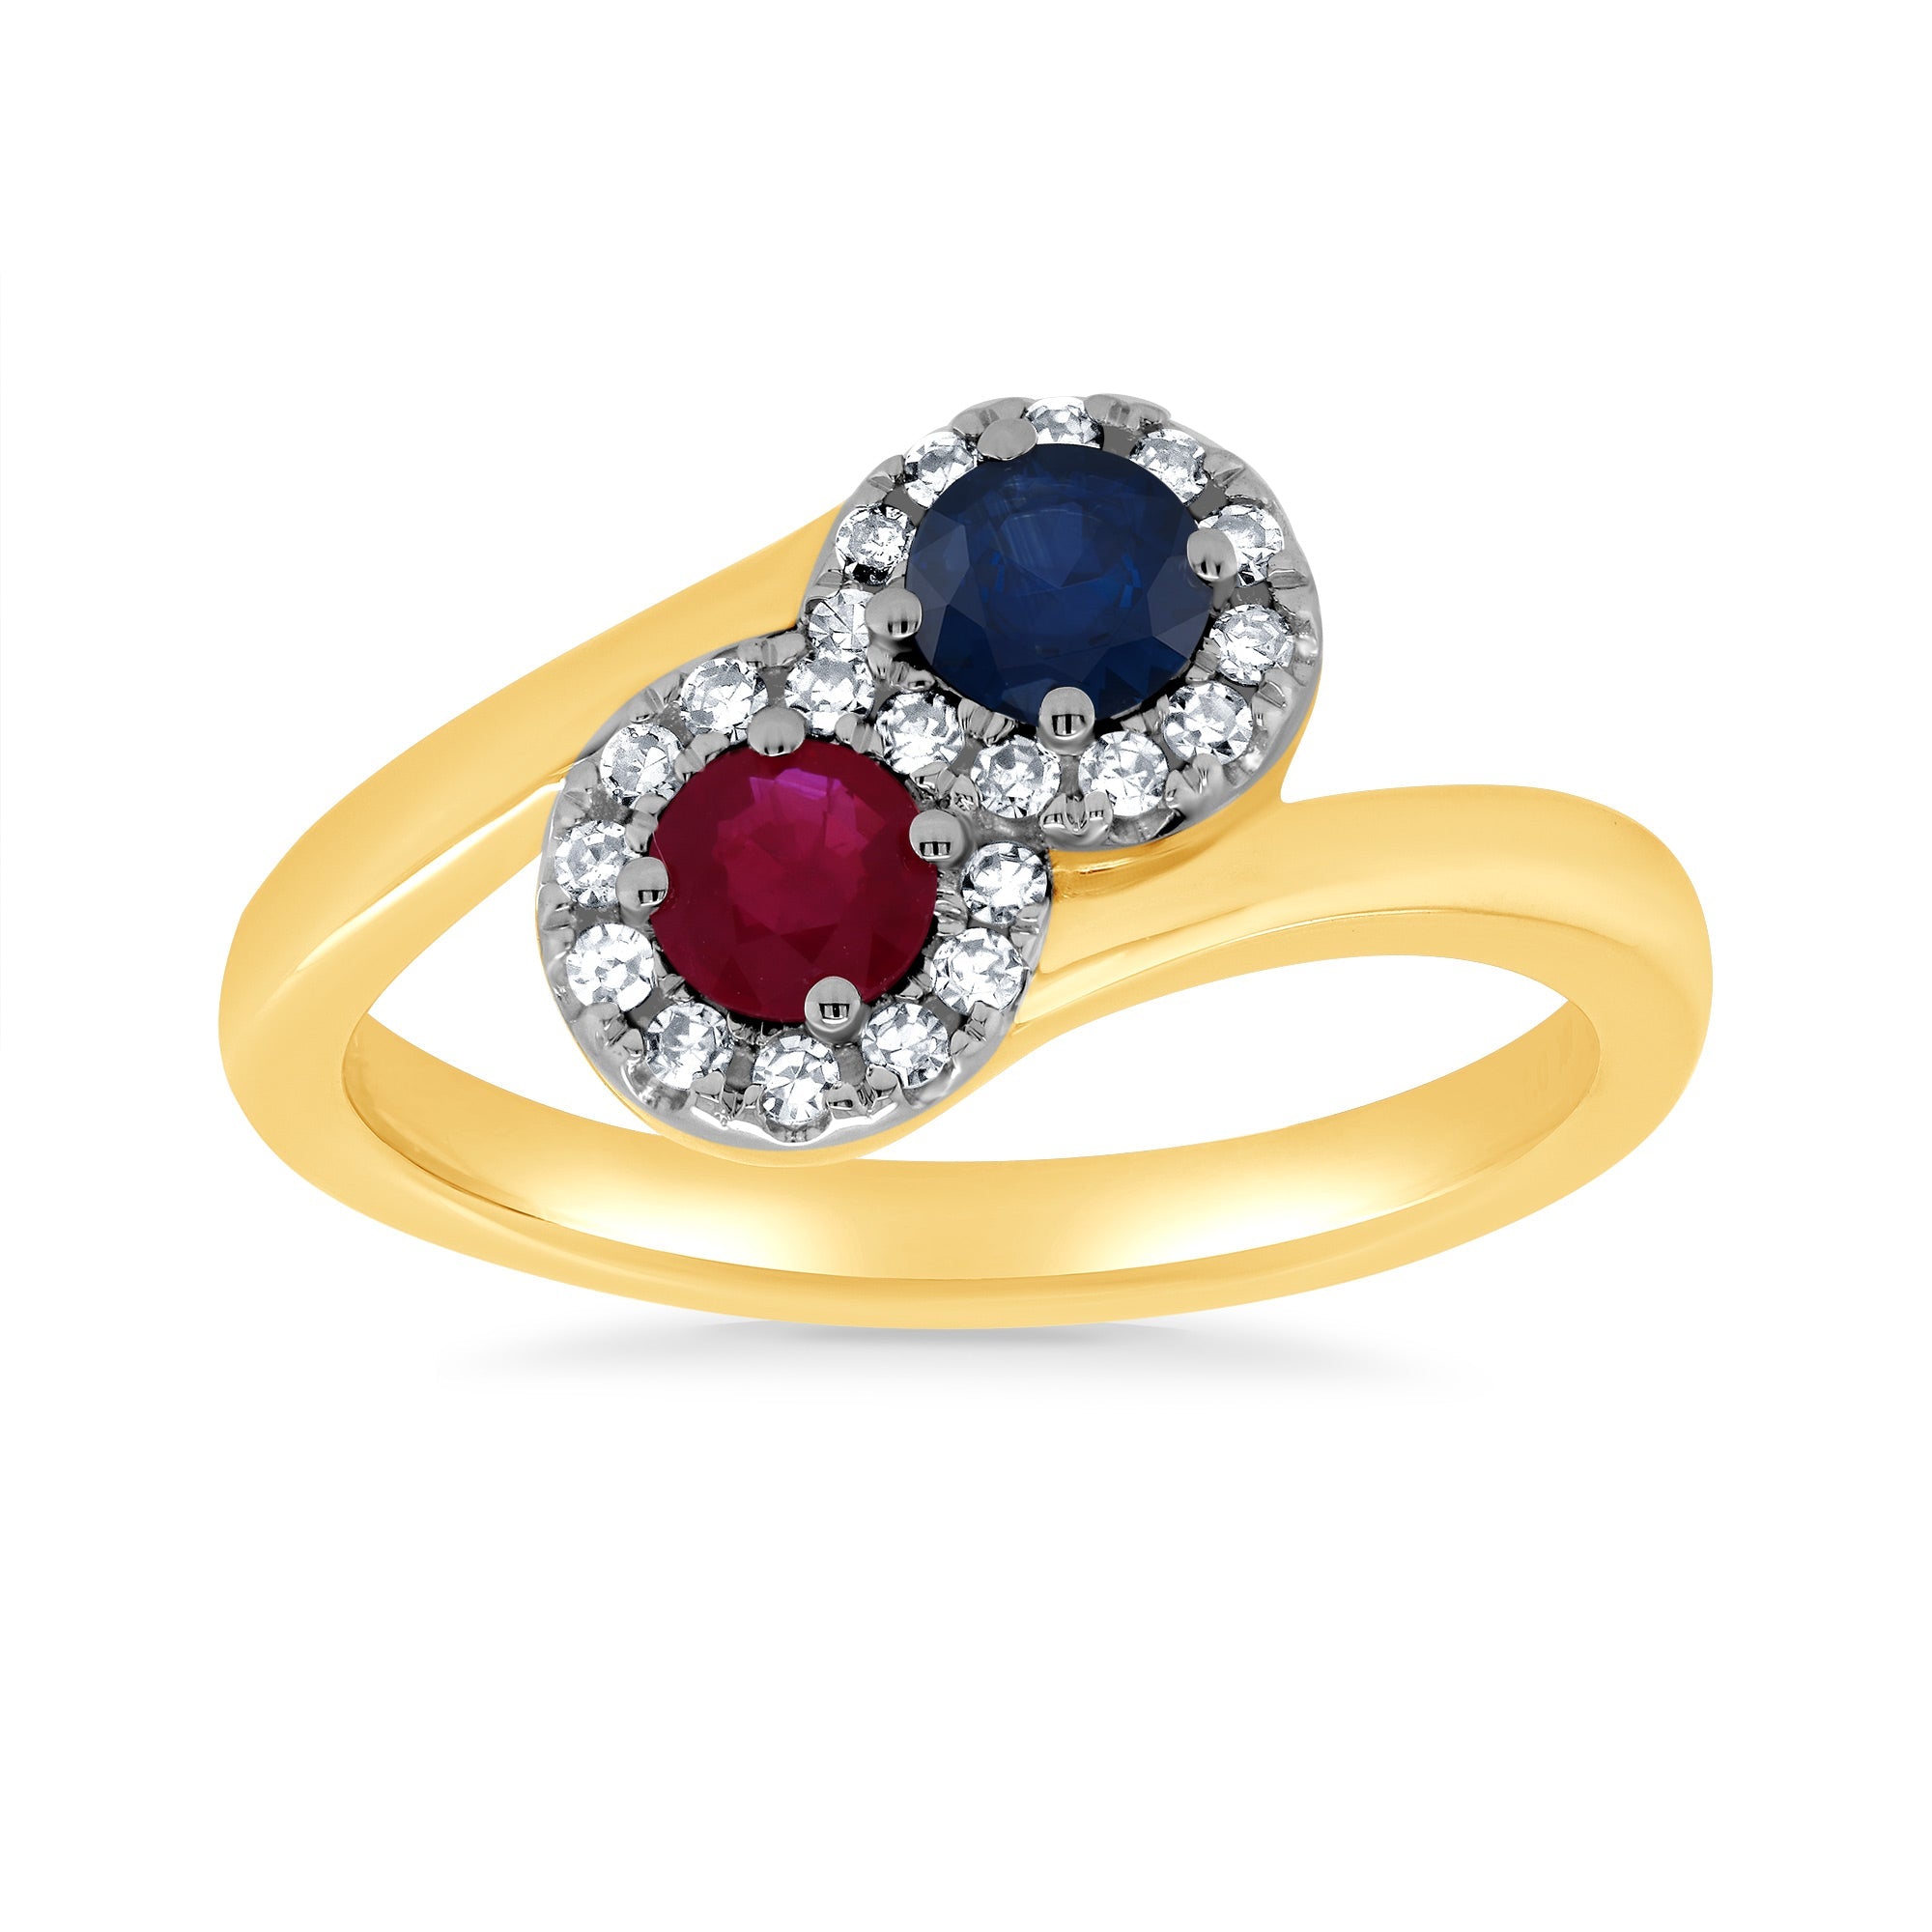 9ct gold 4mm round ruby/sapphire diamond cluster ring 0.17ct